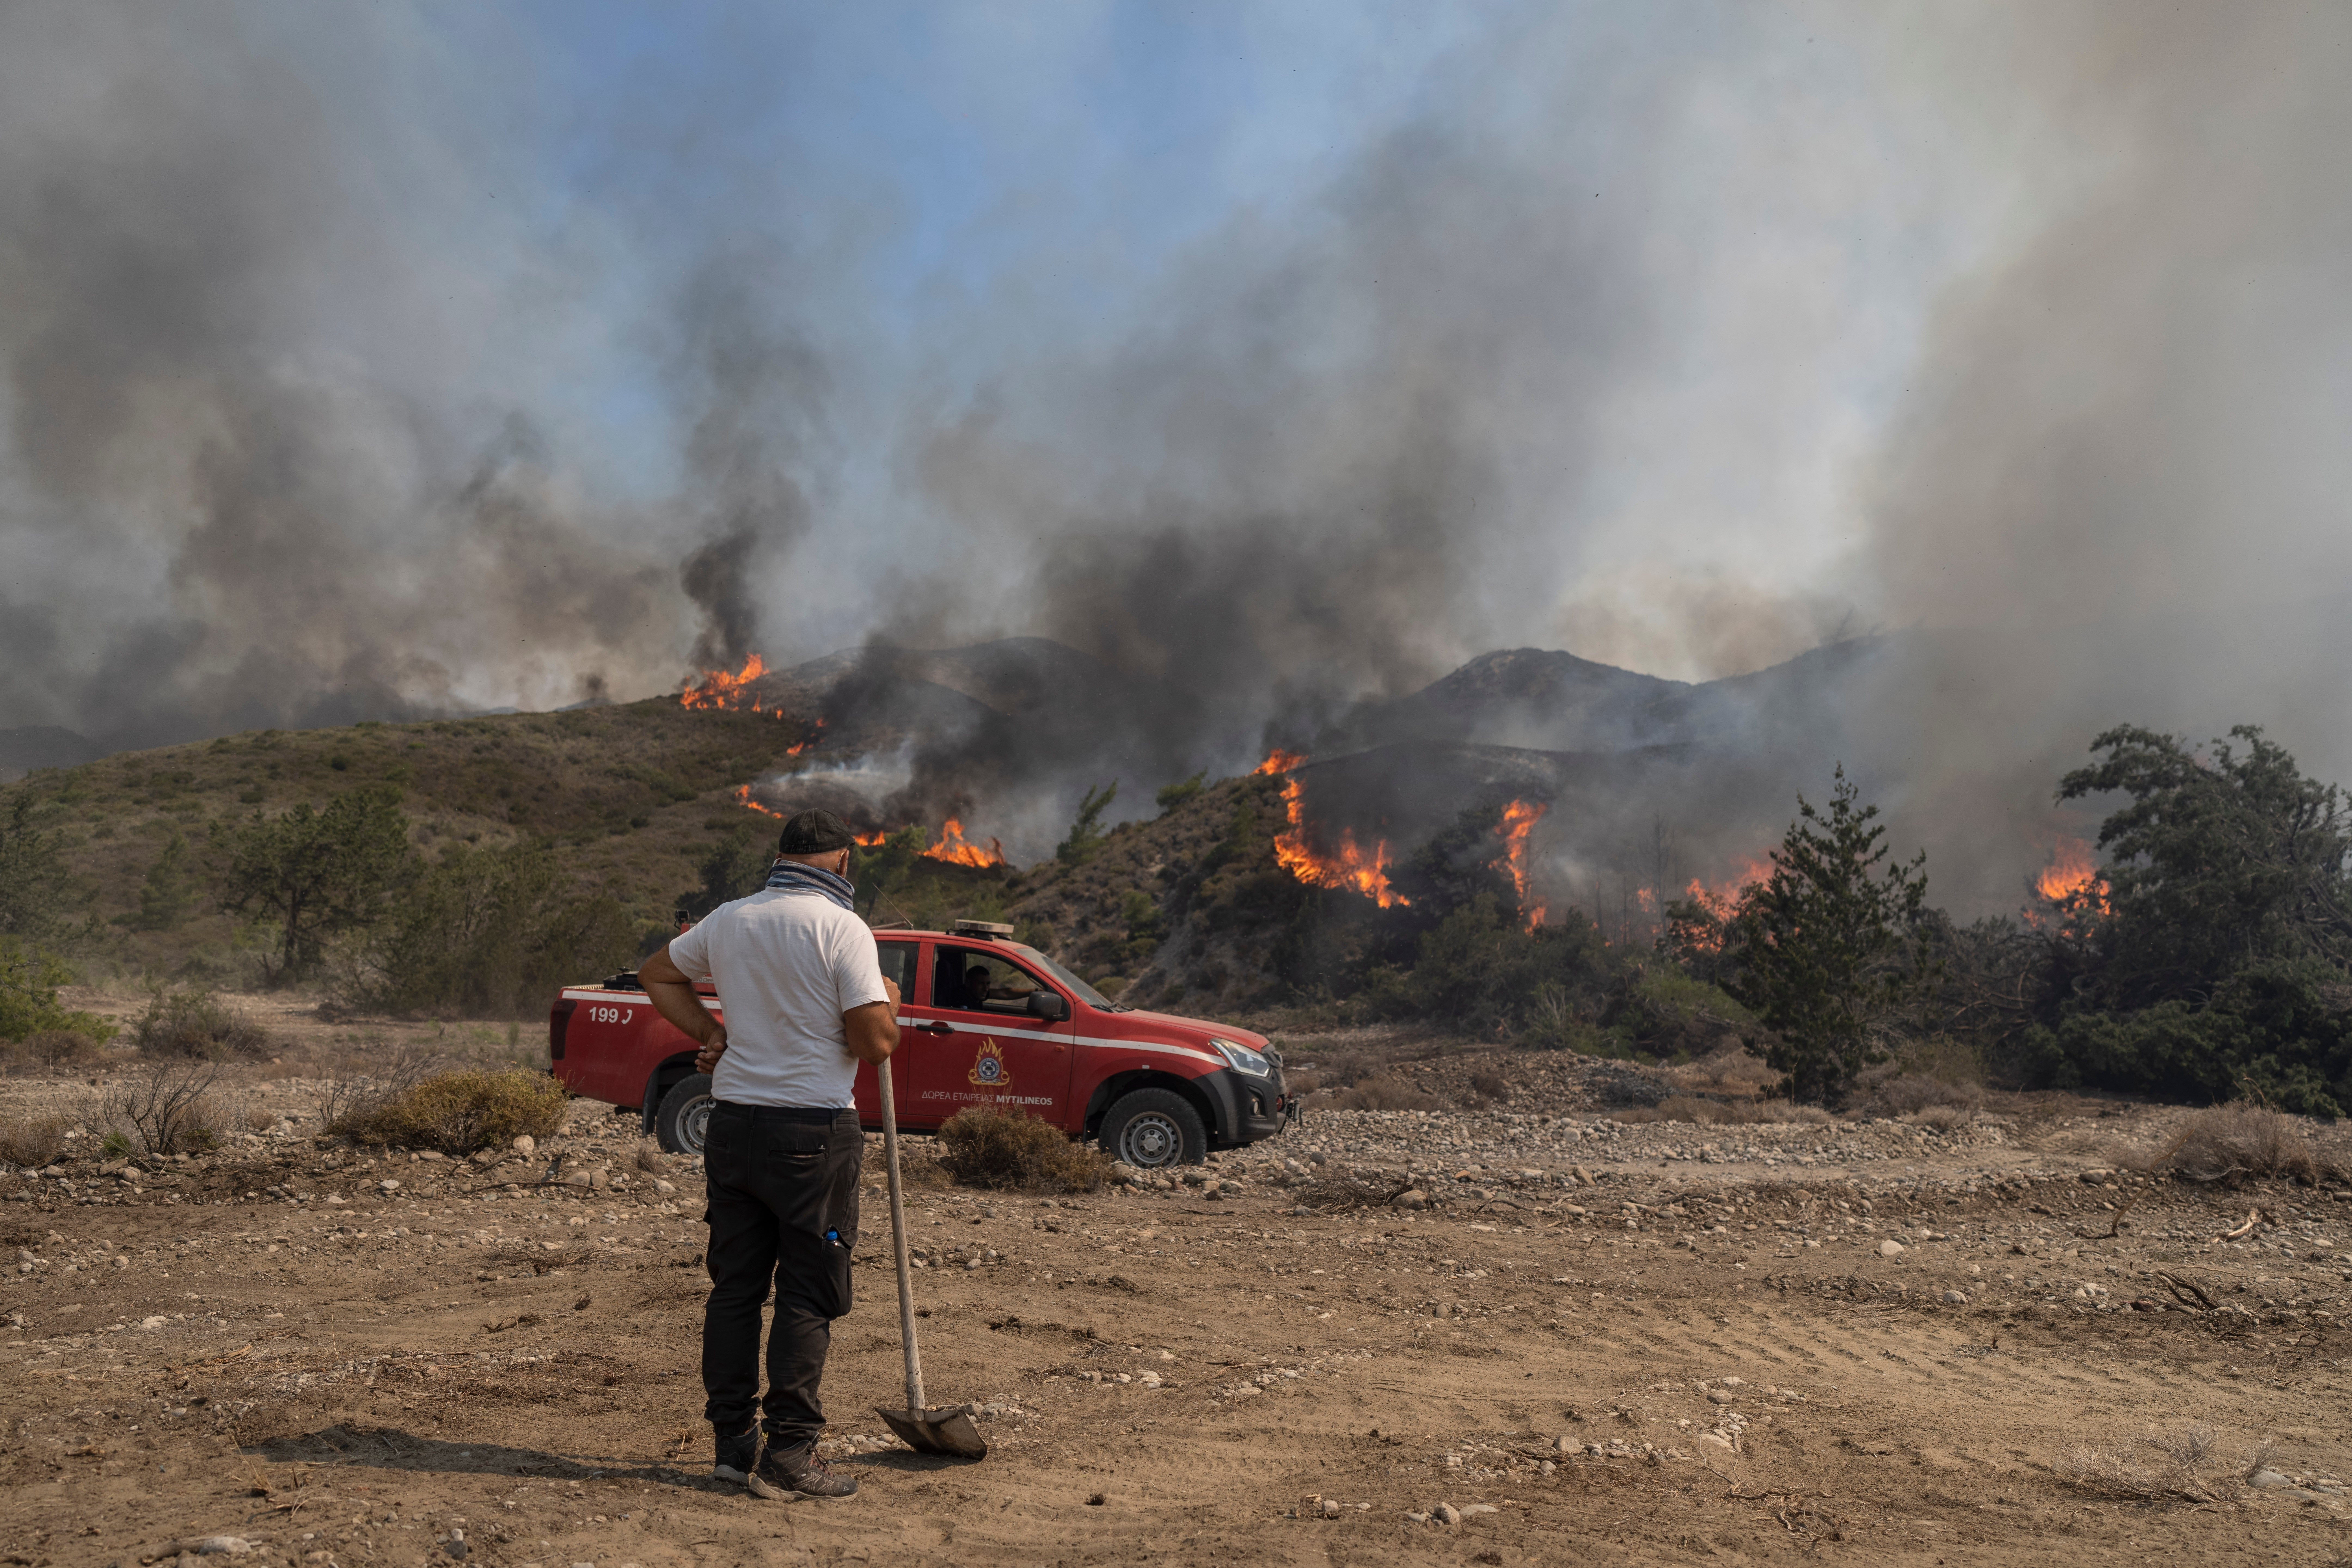 A man watches the fire burning a forest in Vati village, on the Aegean Sea island of Rhodes,